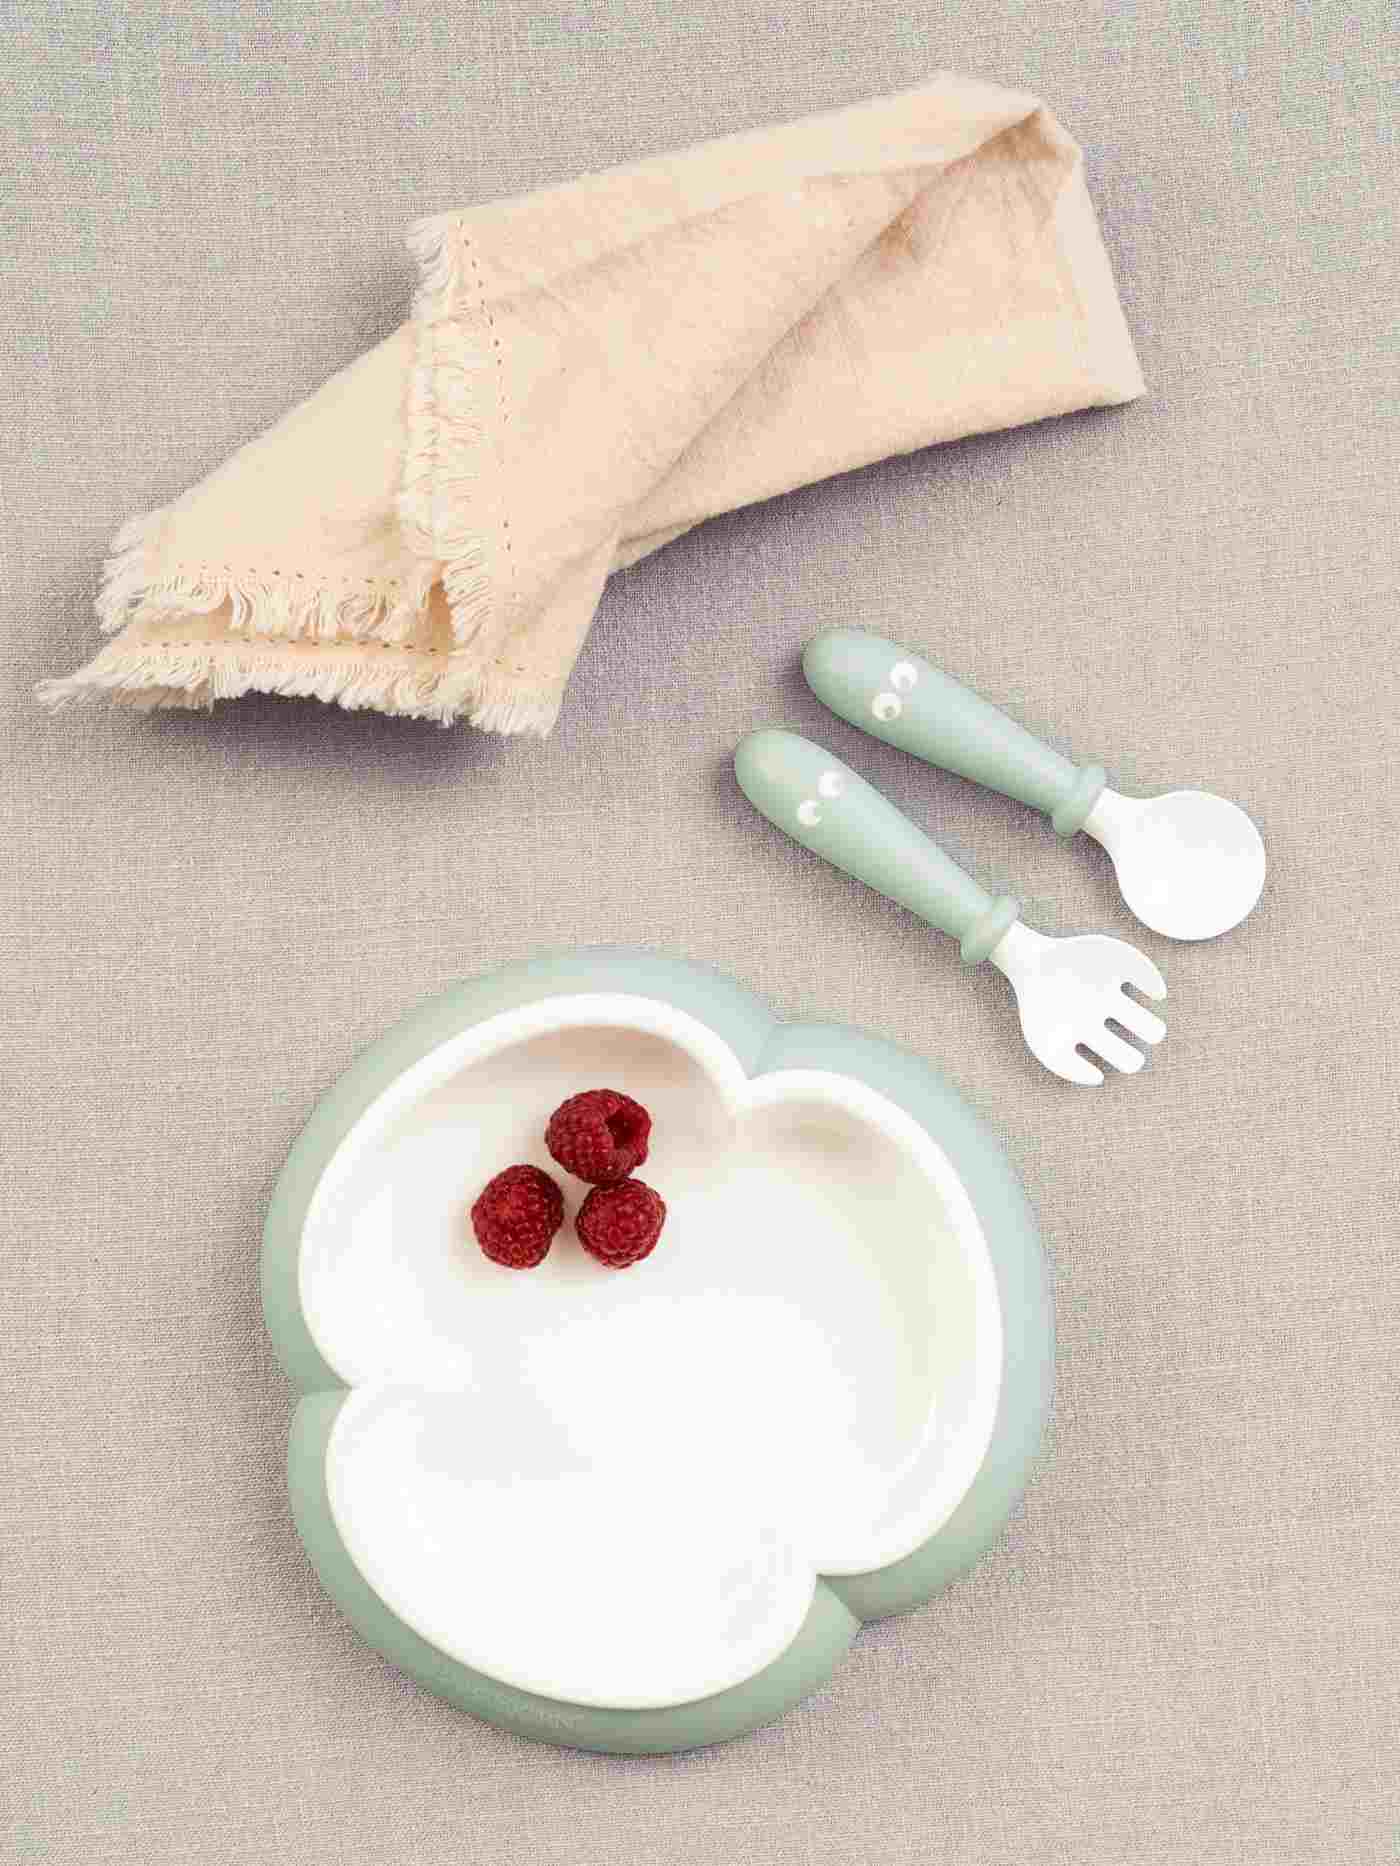 Stretch and cutlery for the baby shower